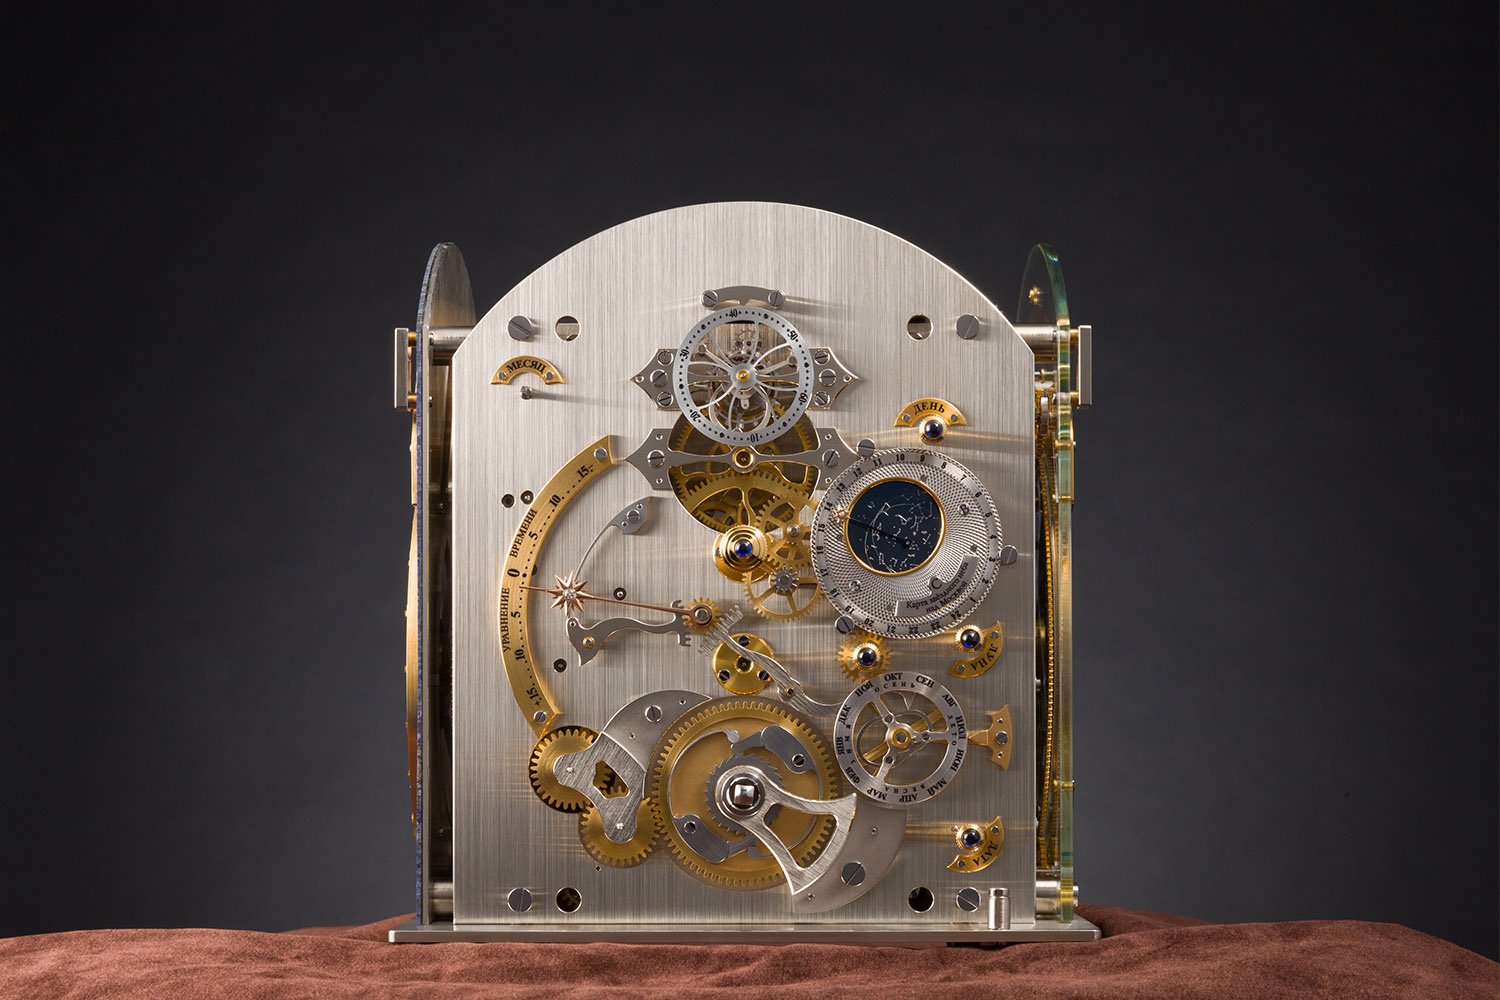 konstantin-chaykin-moscow-comptus-easter-clock-most-complicated-clock-ever-made-in-russia-8